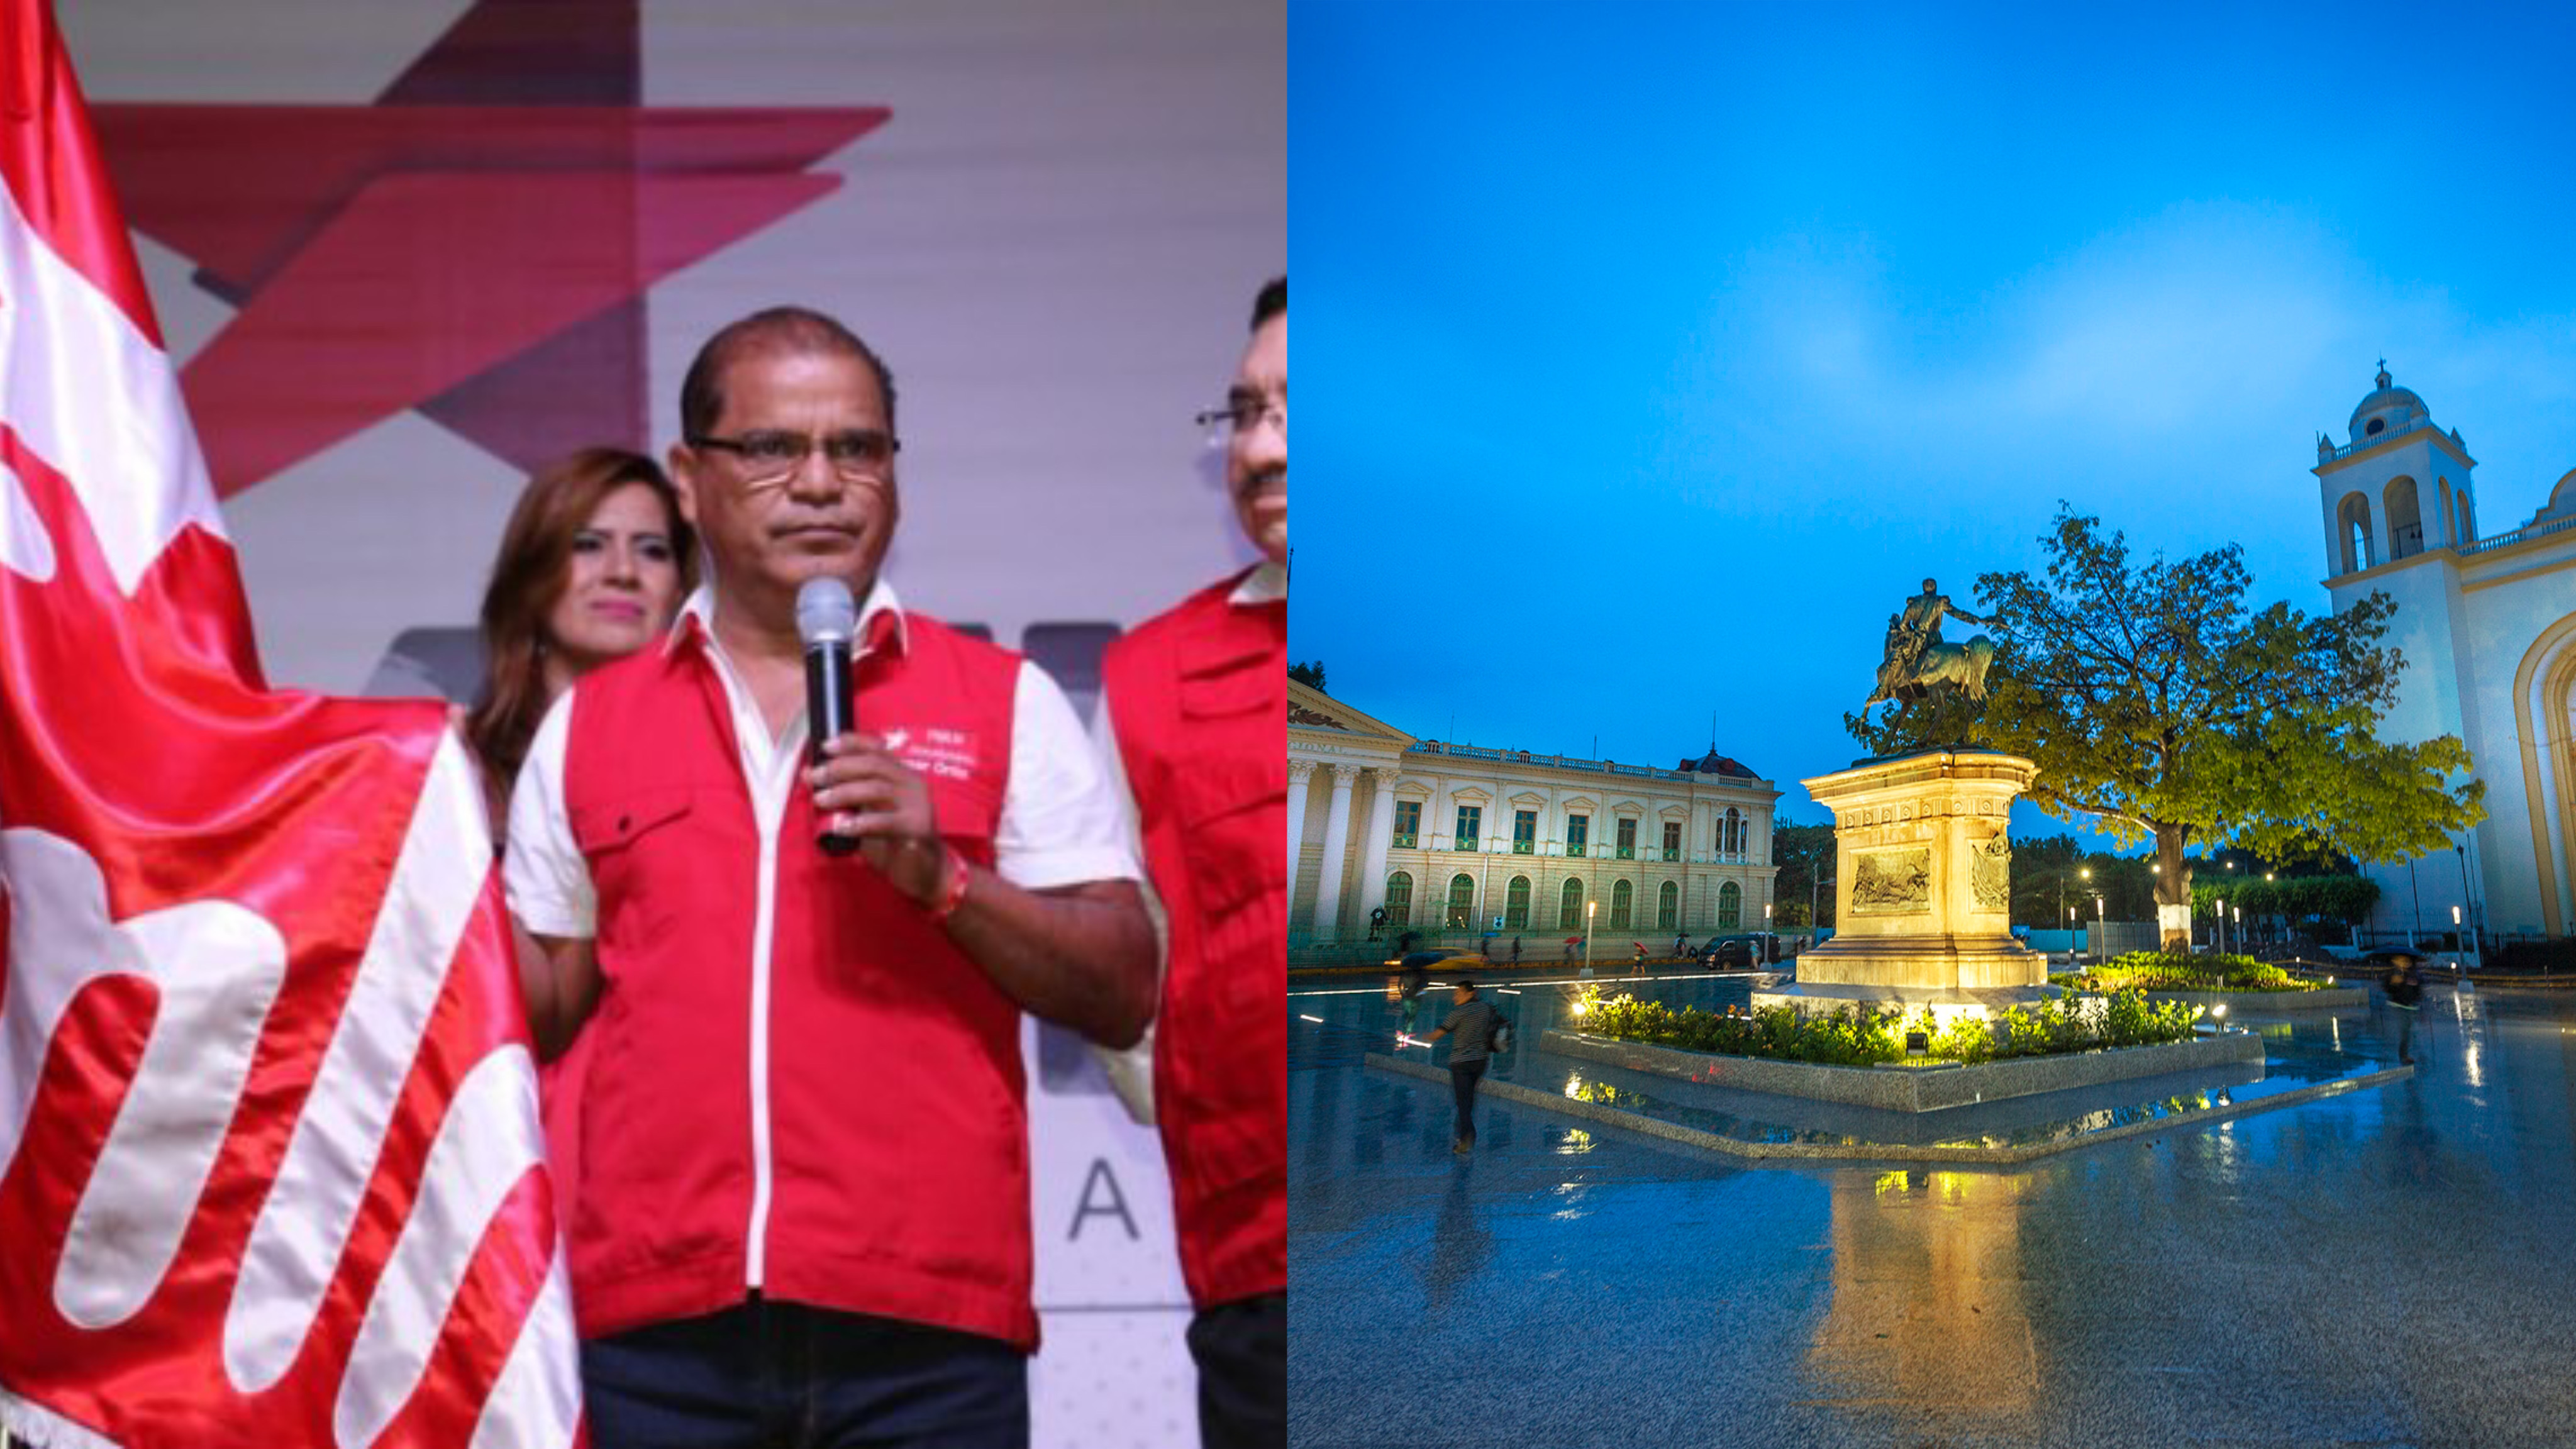 FMLN tried to sabotage the remodeling of the Historic Center of San Salvador